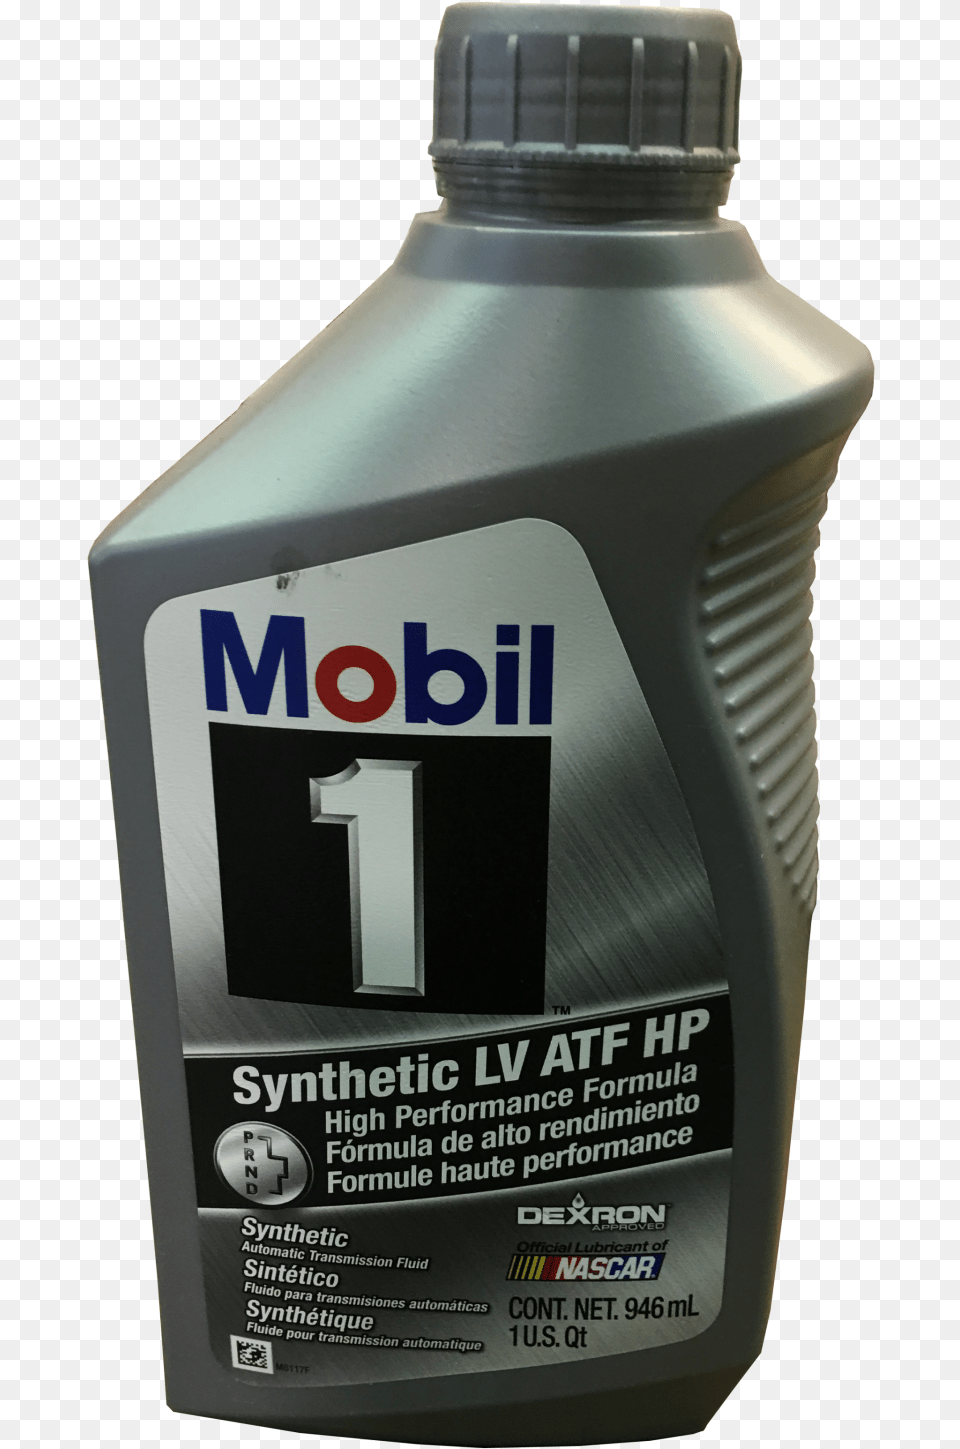 Gm Mobil 1 Lv Atf Hp, Bottle, Cosmetics, Perfume, Aftershave Free Png